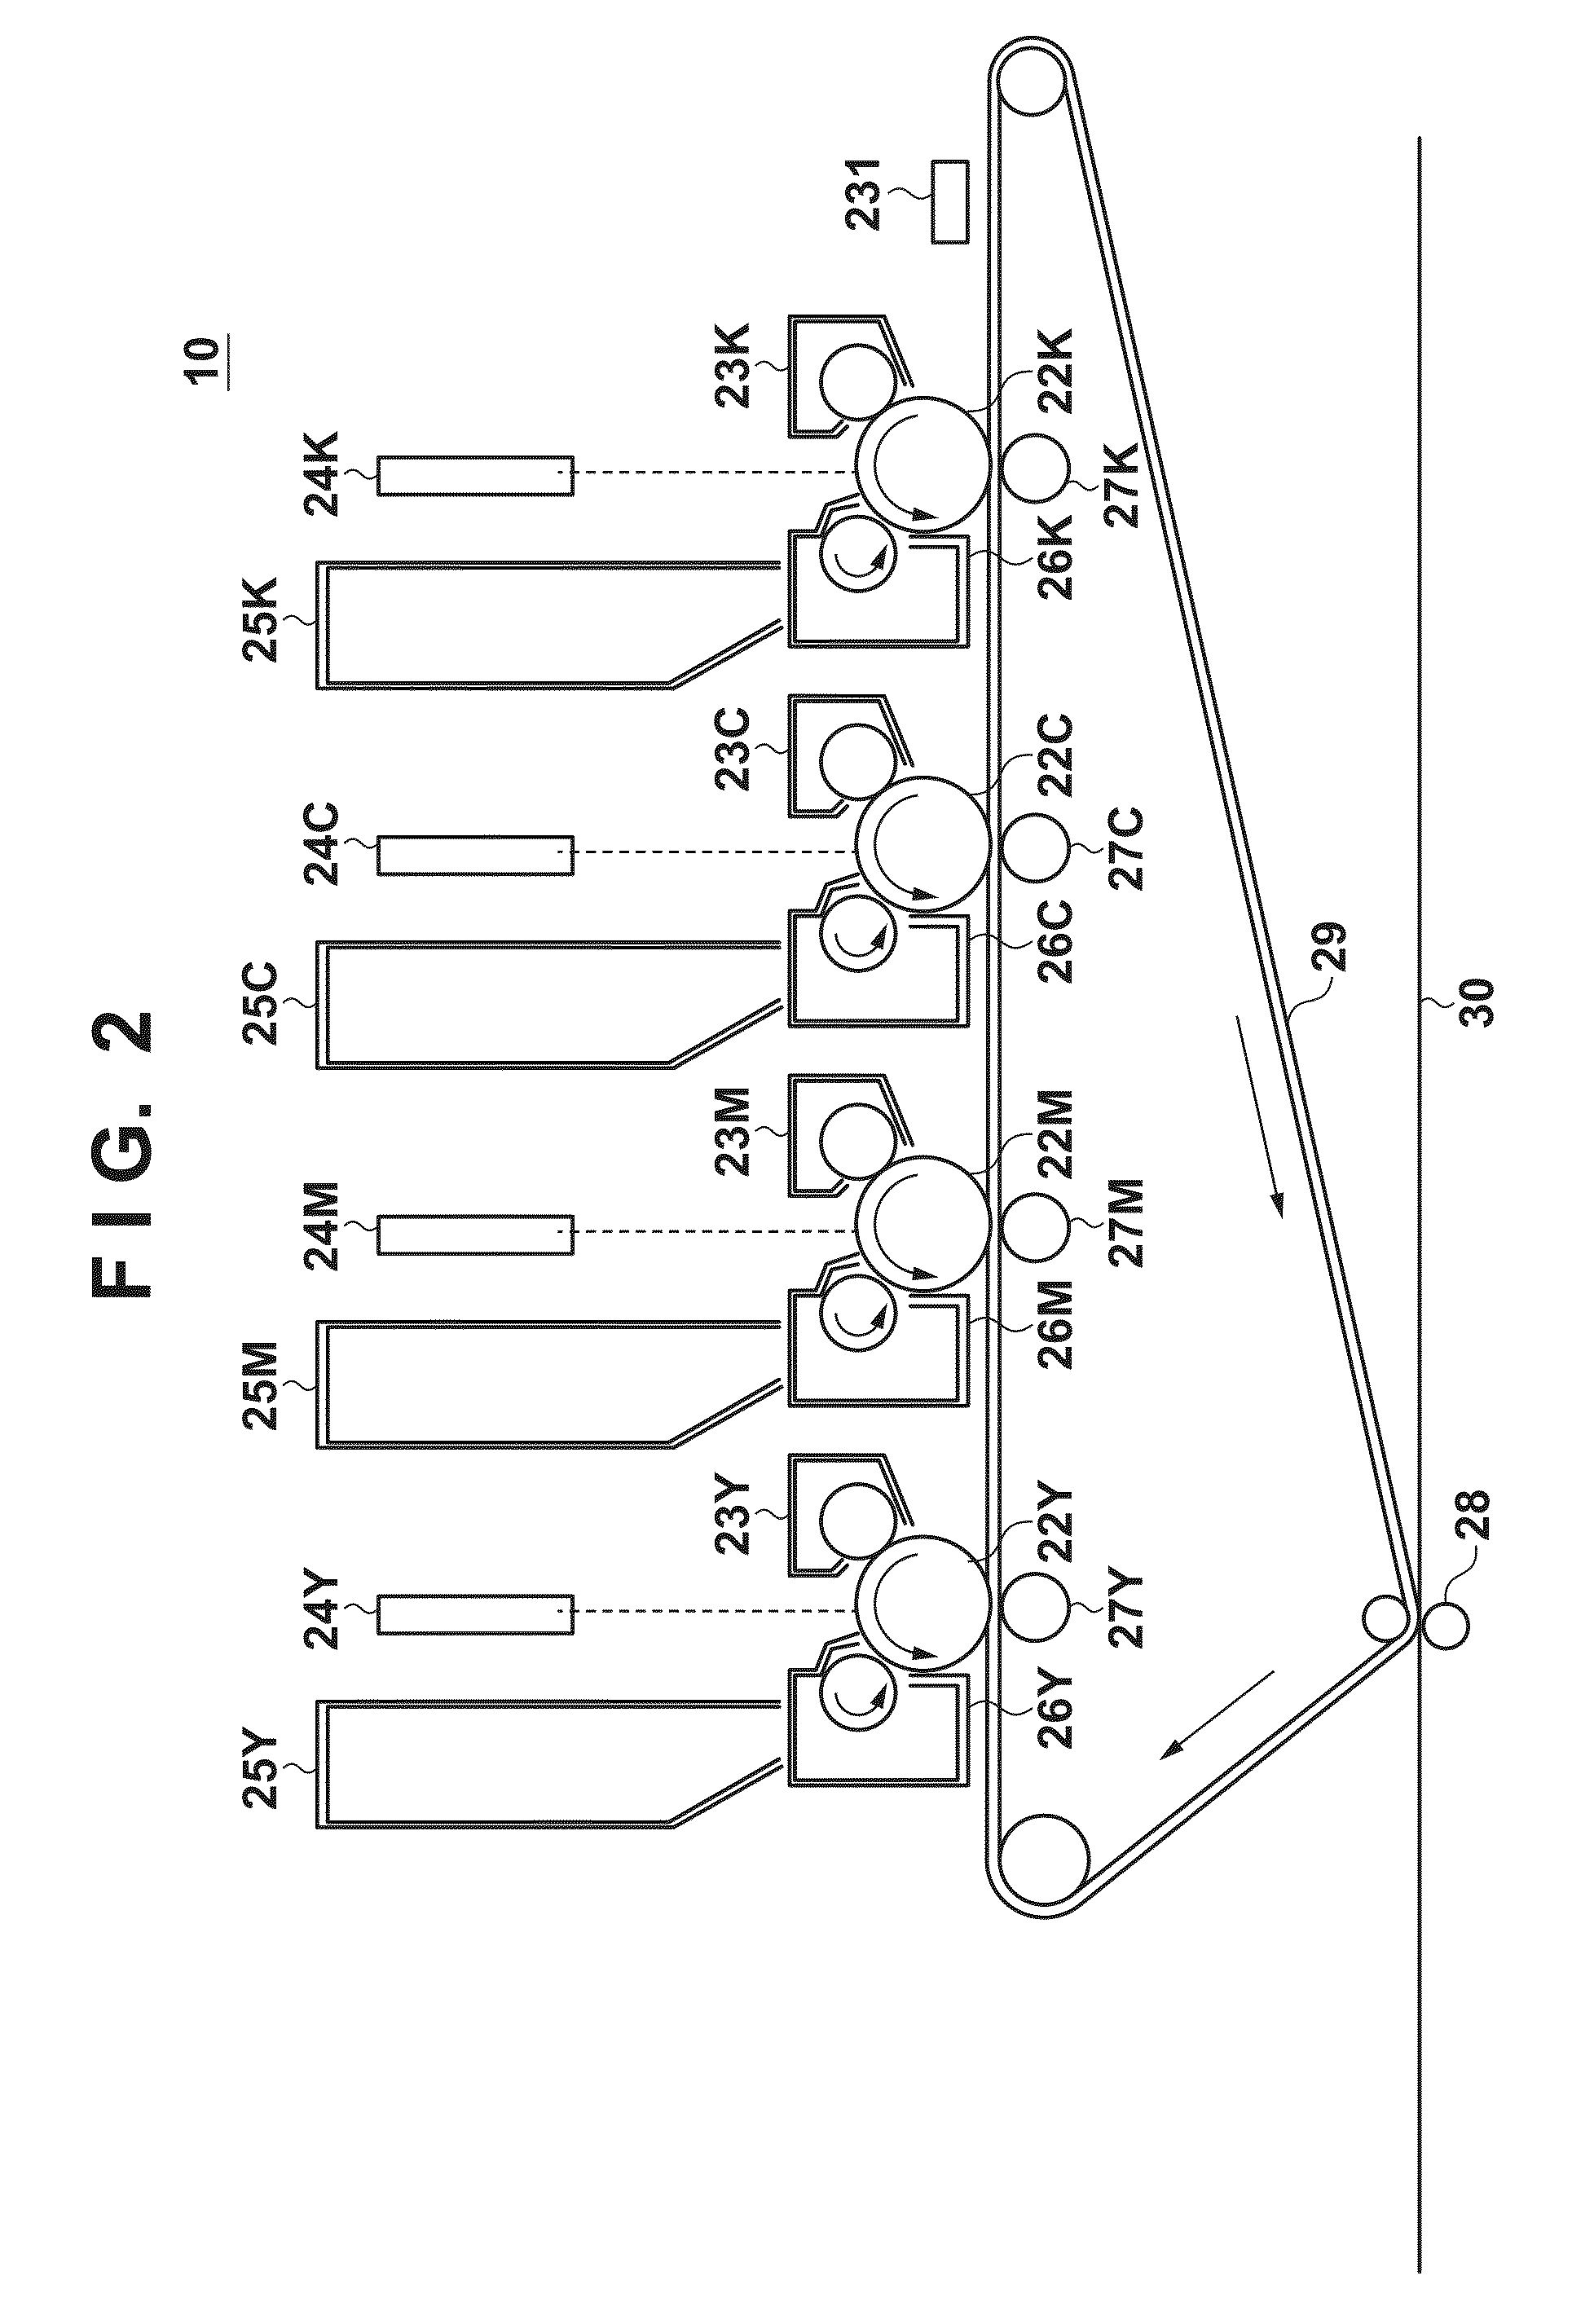 Image processing apparatus for executing halftone processing, image processing system, image processing method, program product, and computer-readable storage medium